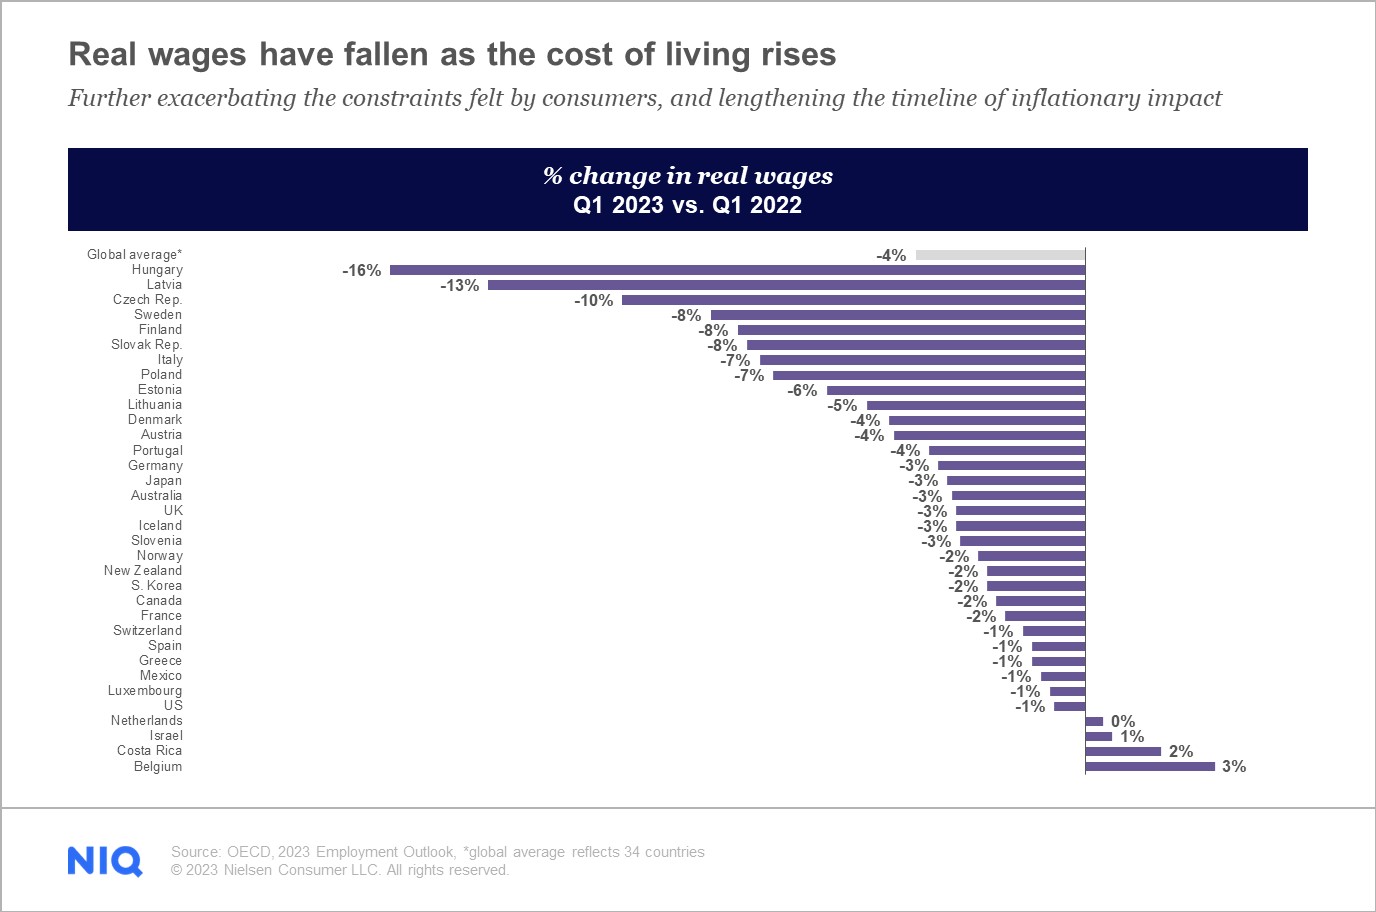 Chart showing how global wage stagnation has contributed to higher cost of living